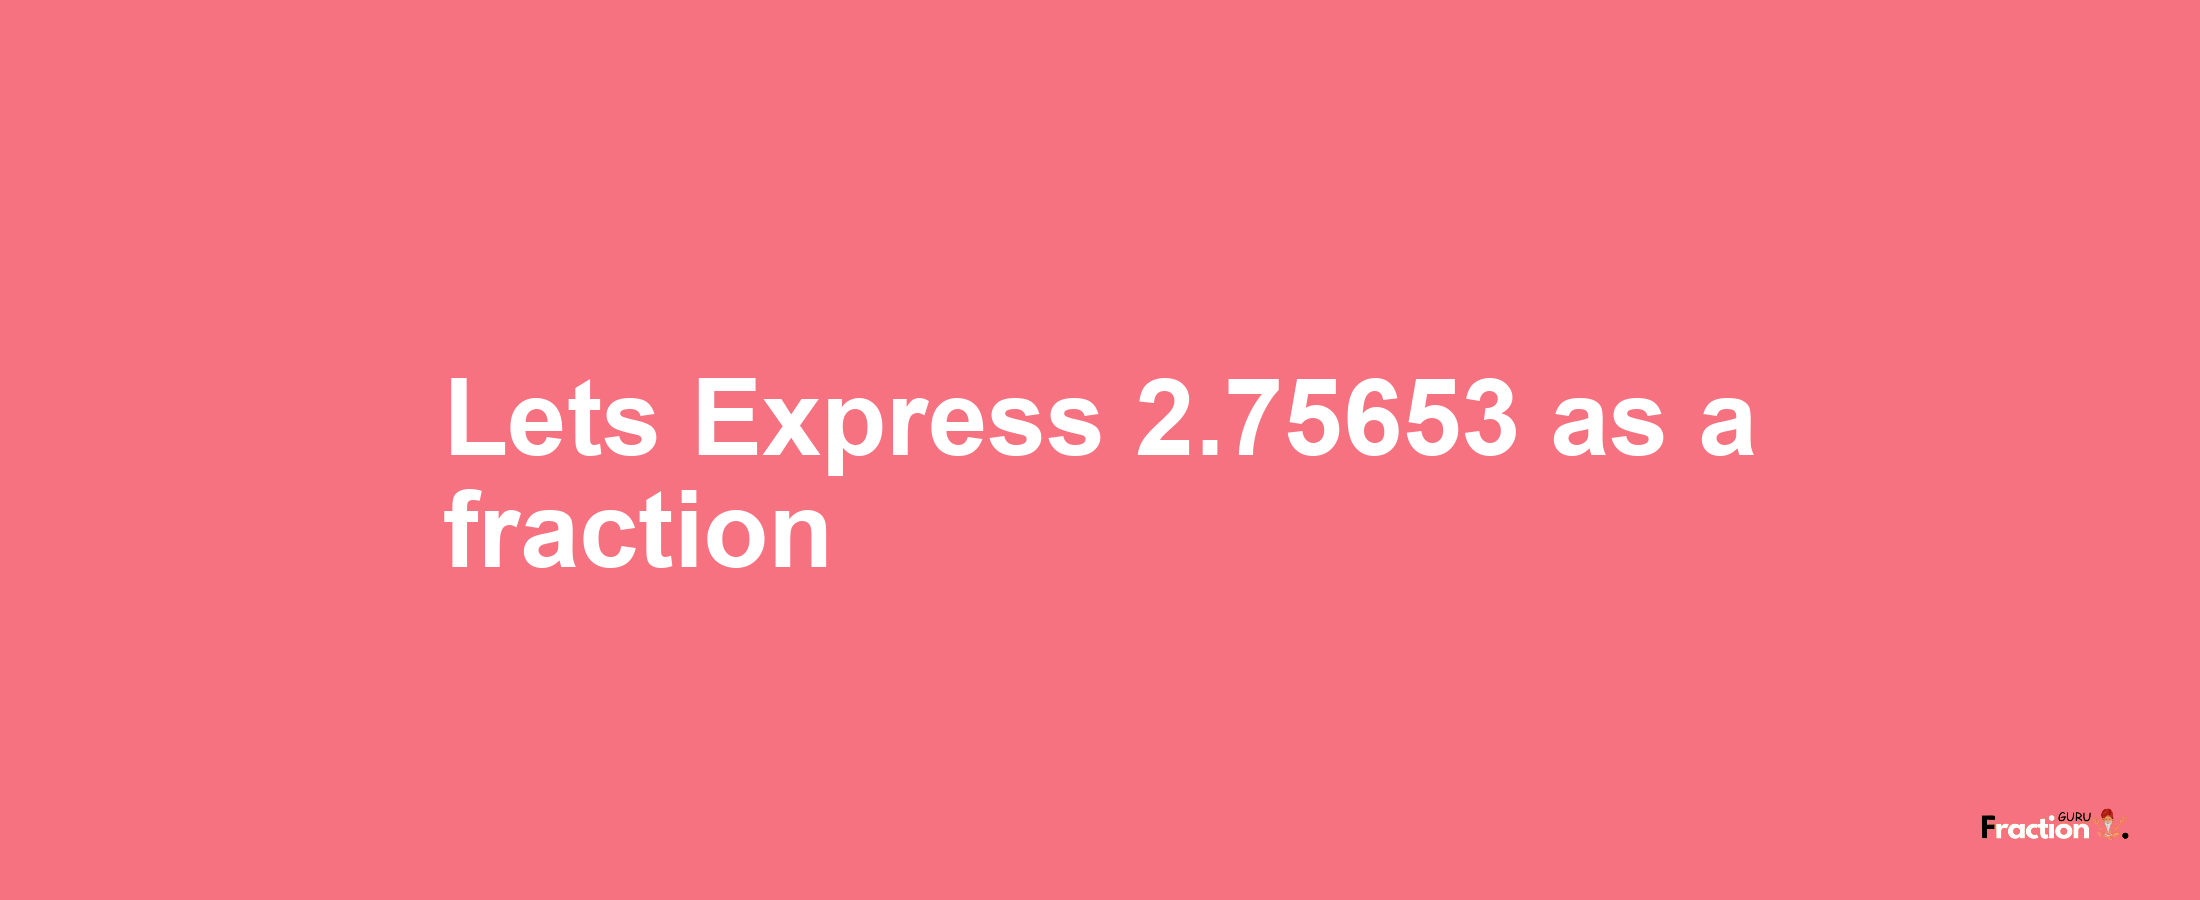 Lets Express 2.75653 as afraction